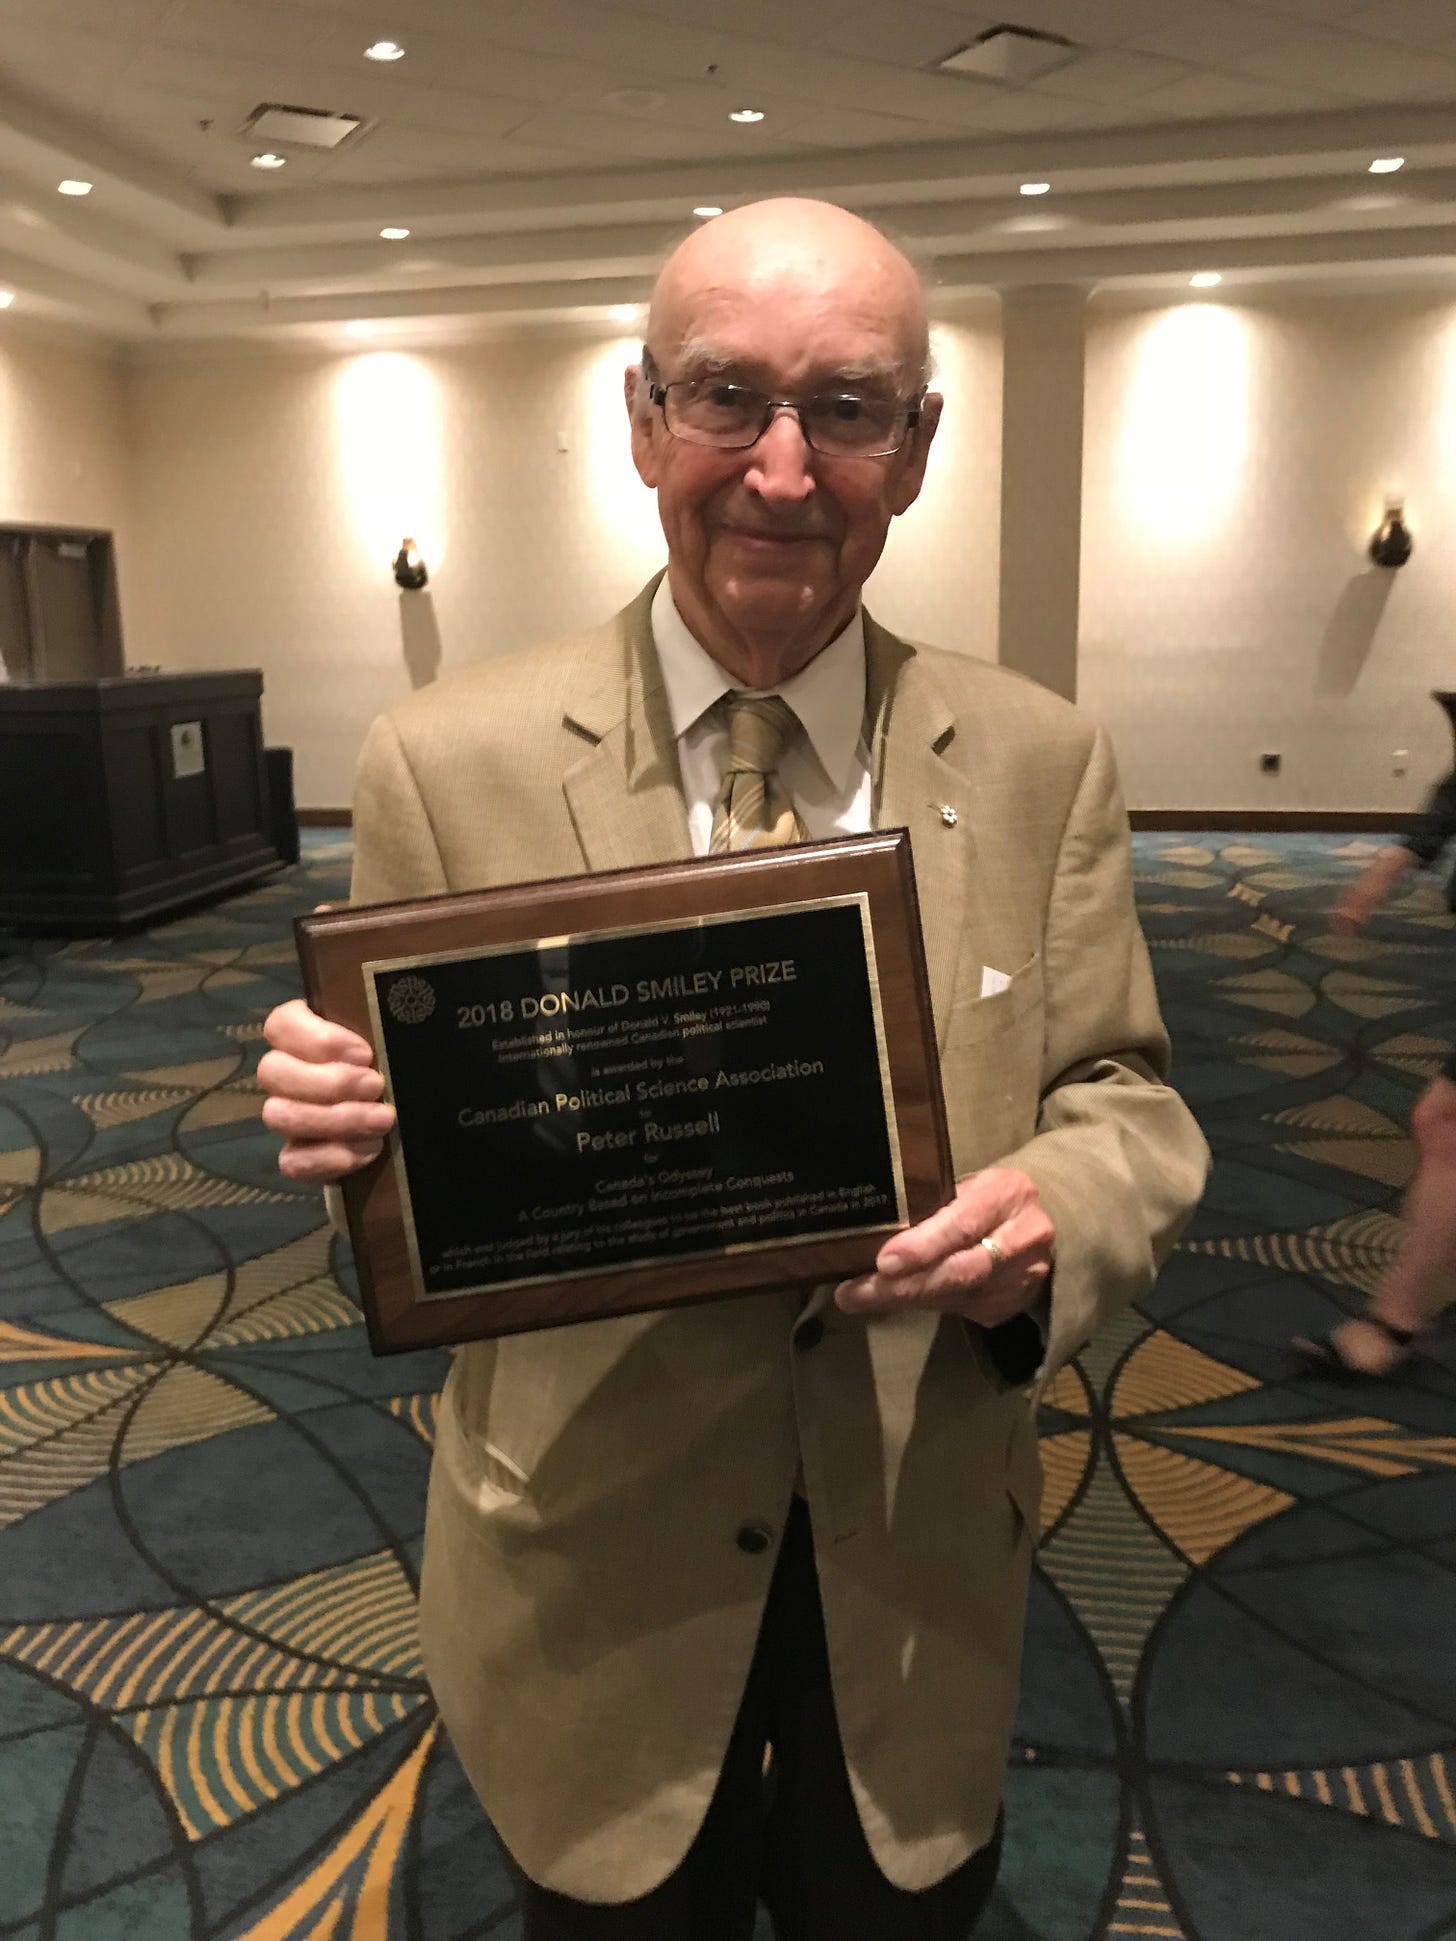 Peter Russell holding his 2018 book award.